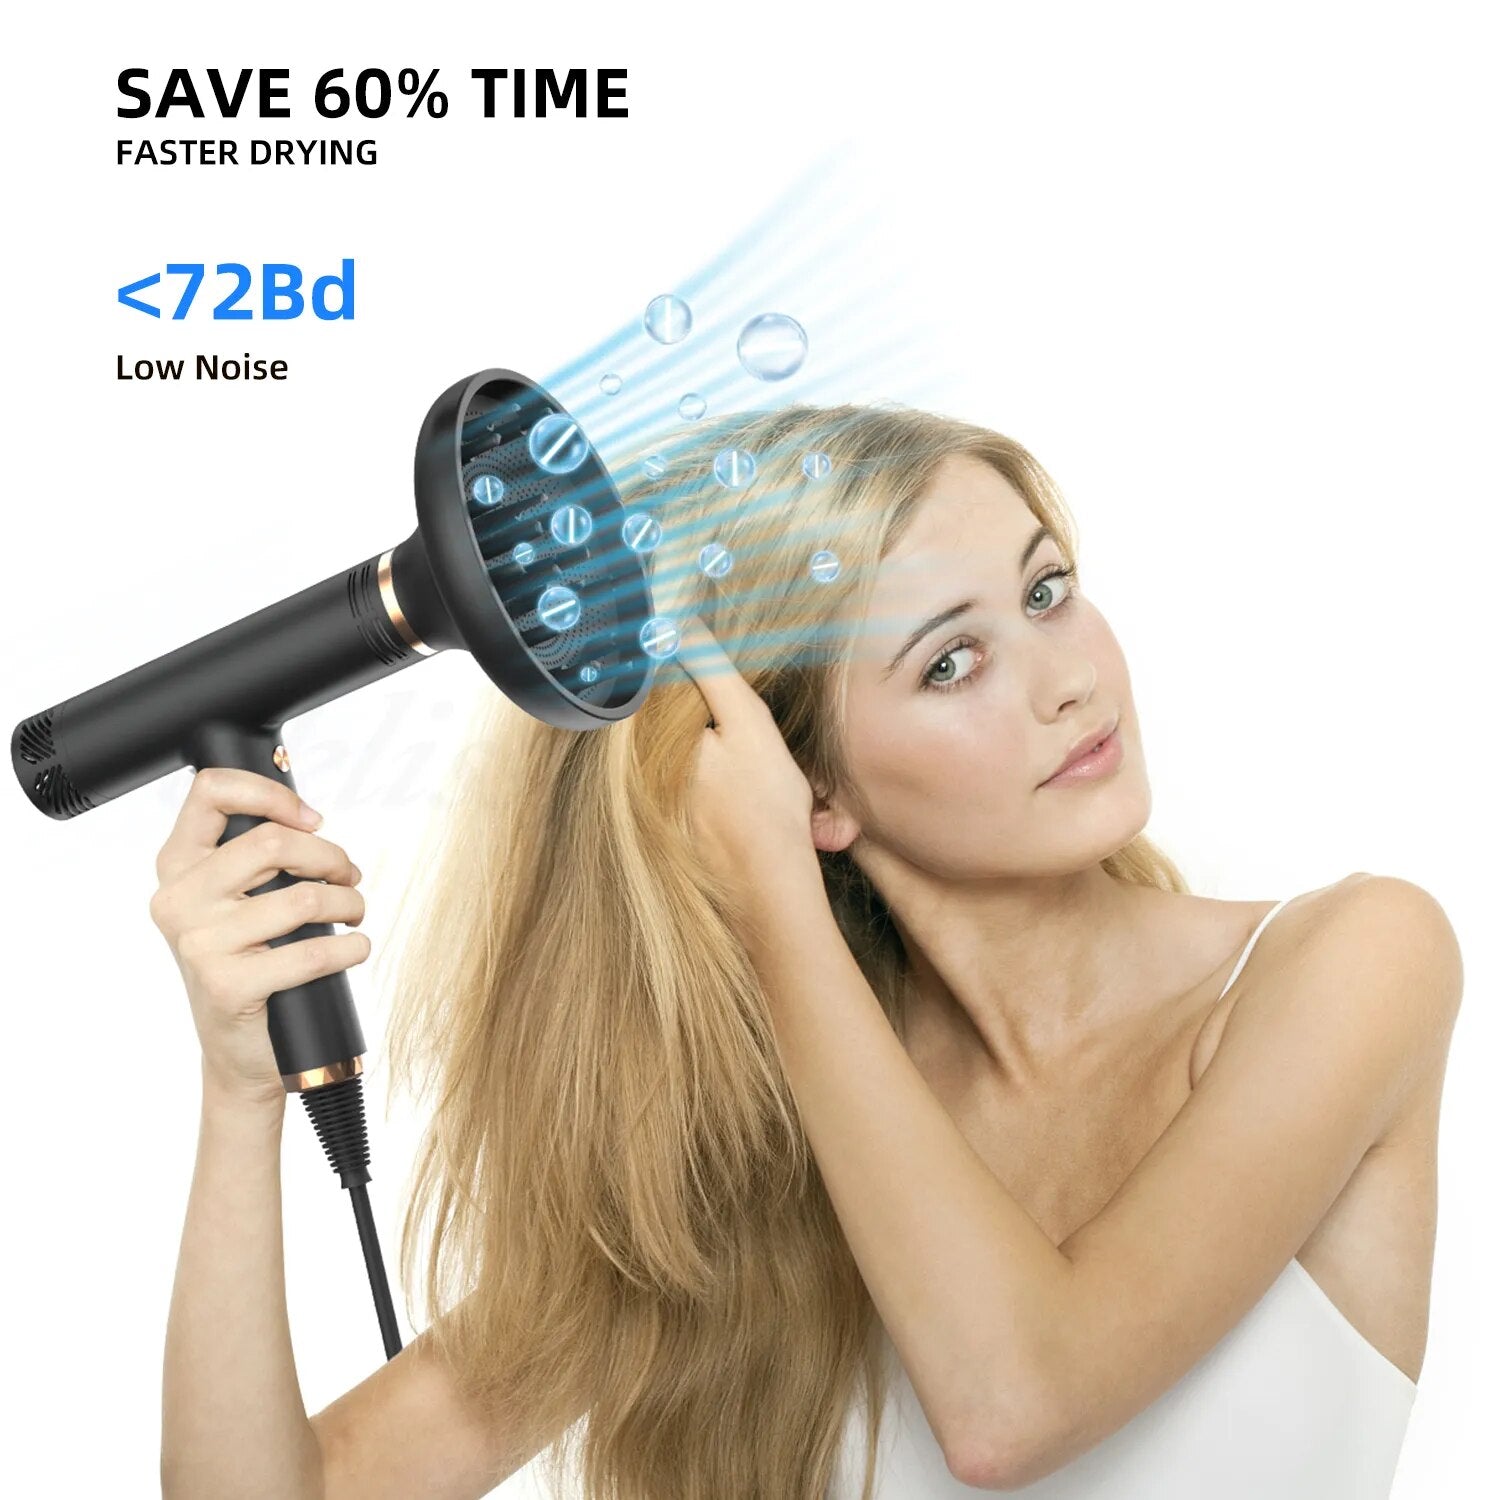 Ionic Hair Dryer High Speed Blow Drier 1600W 110000Rpm Hairdryer Negative Ion Hair Care Styler Professional Low Noise Blow Dryer